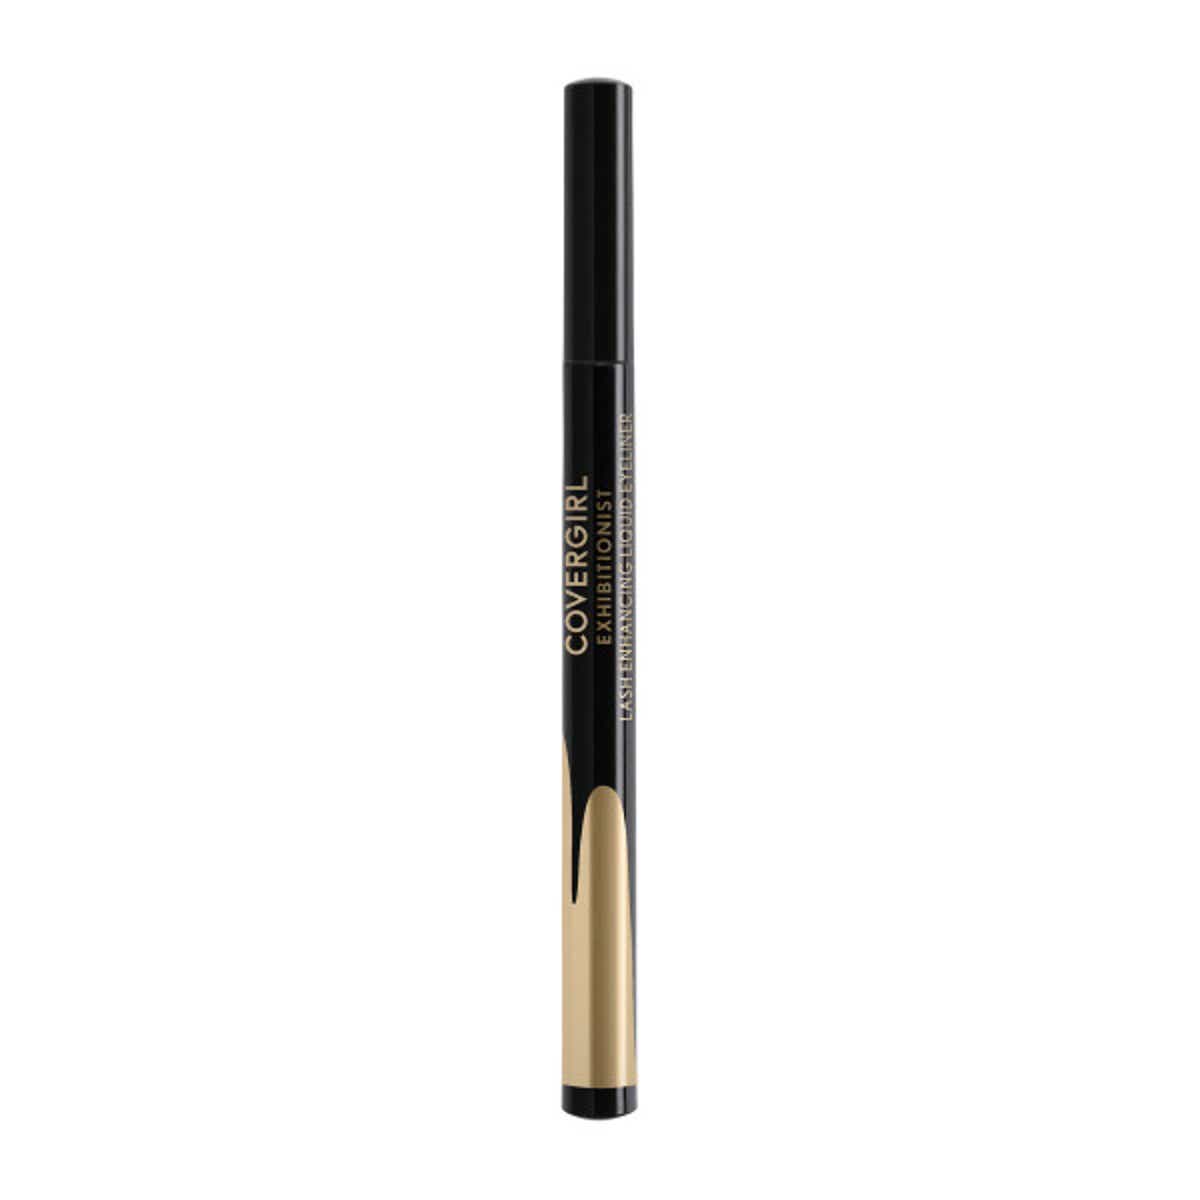 COVERGIRL Defining Moment All Day Eyeliner, 115 Silver Metallic